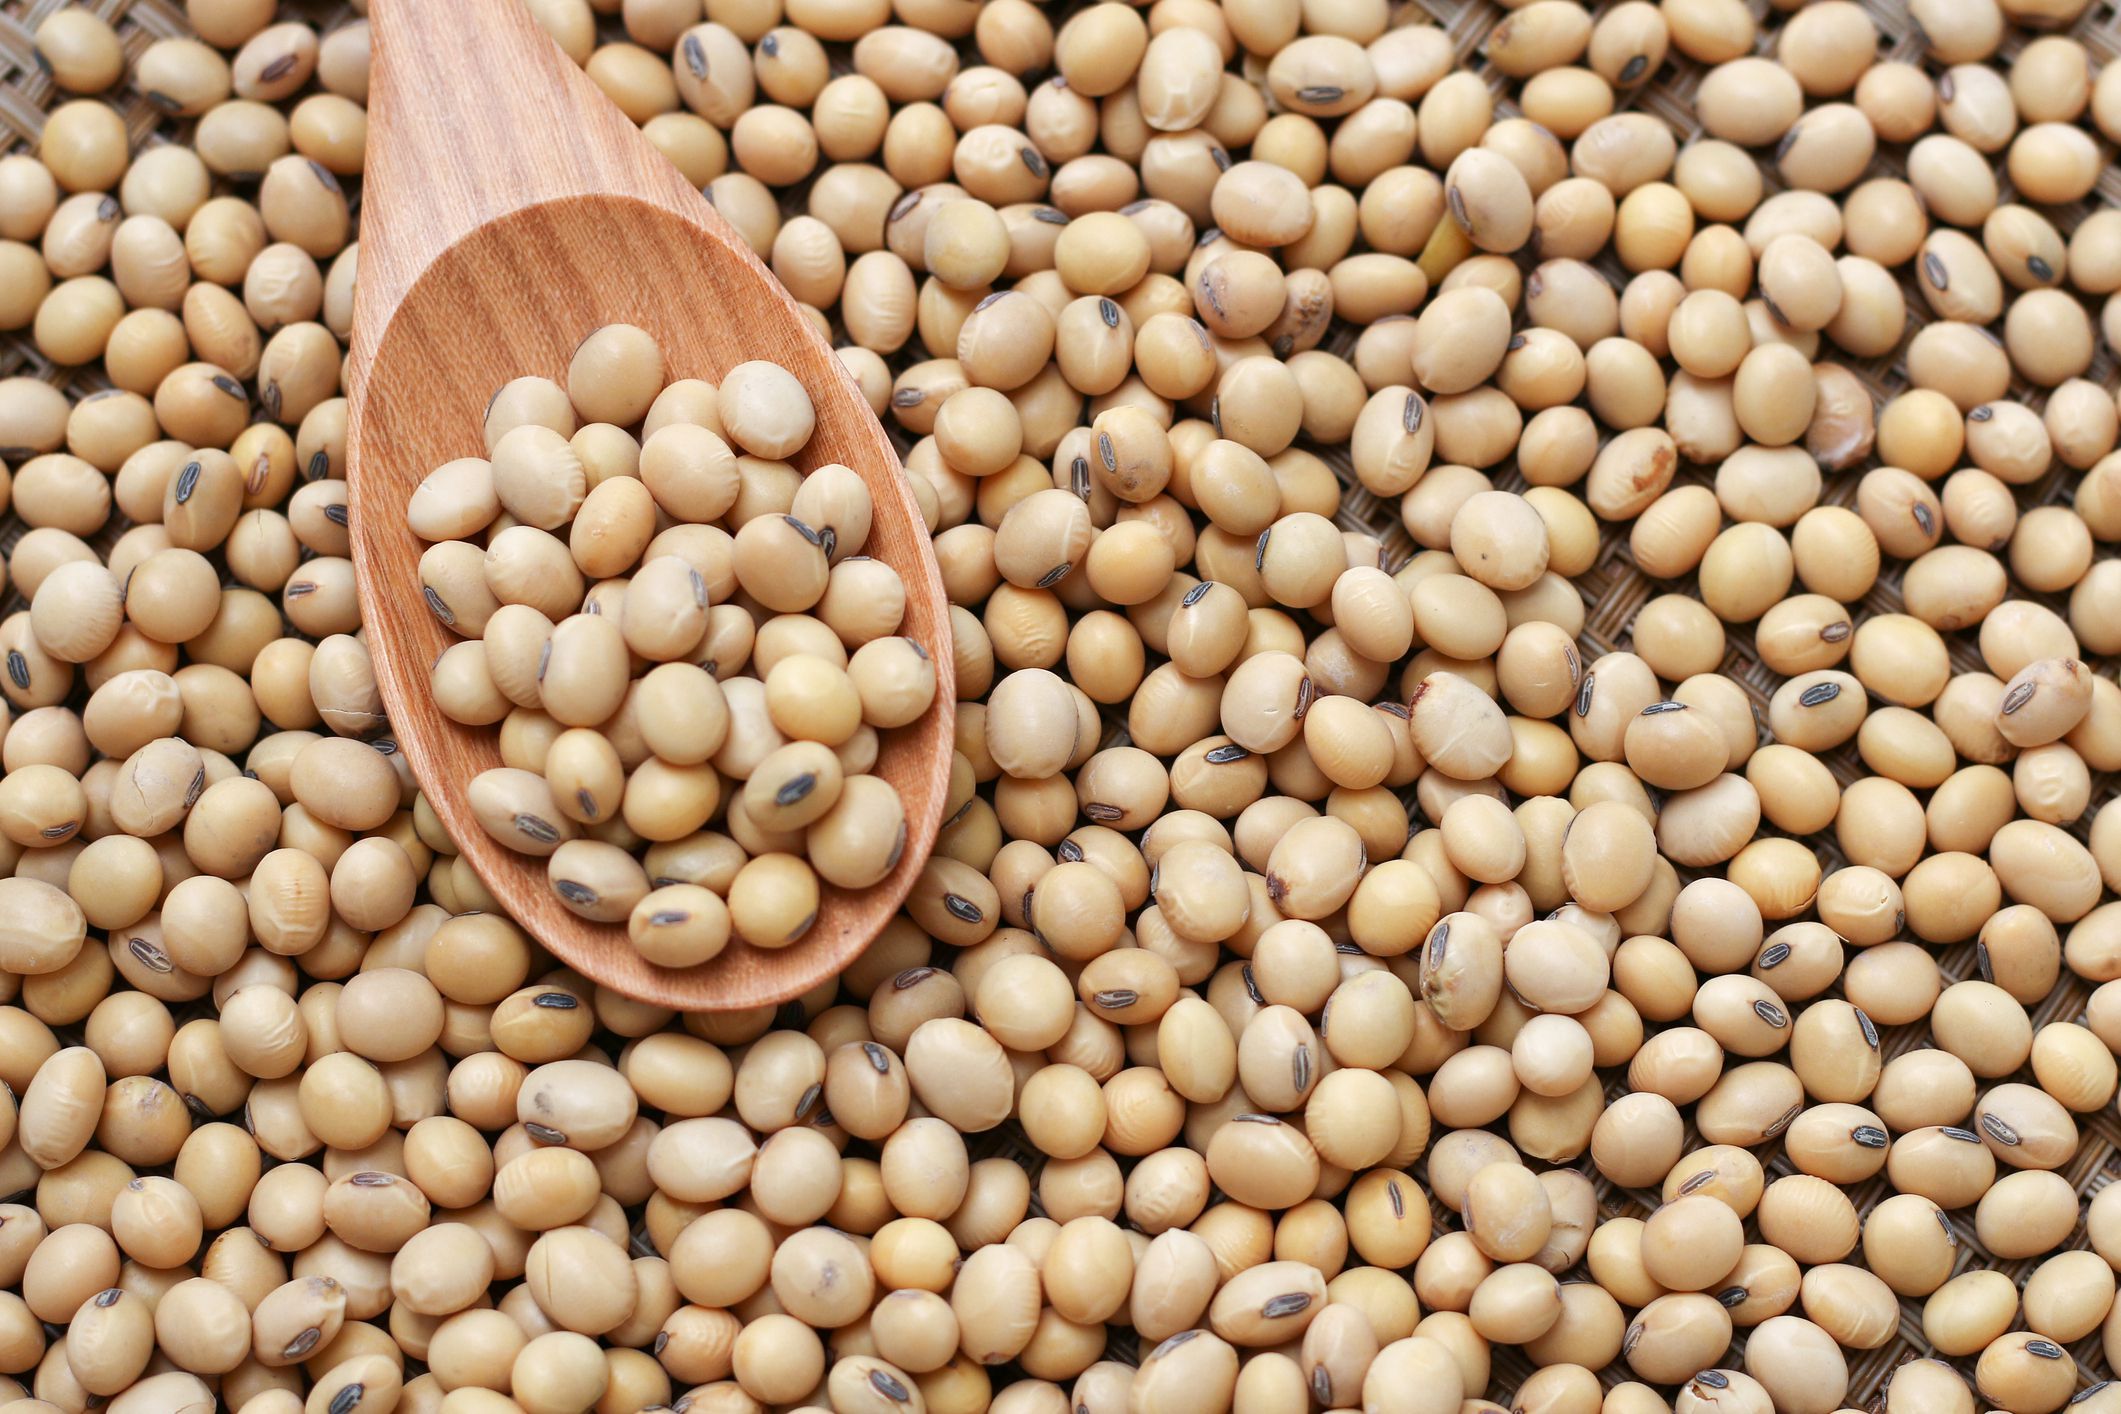 Soybeans Image